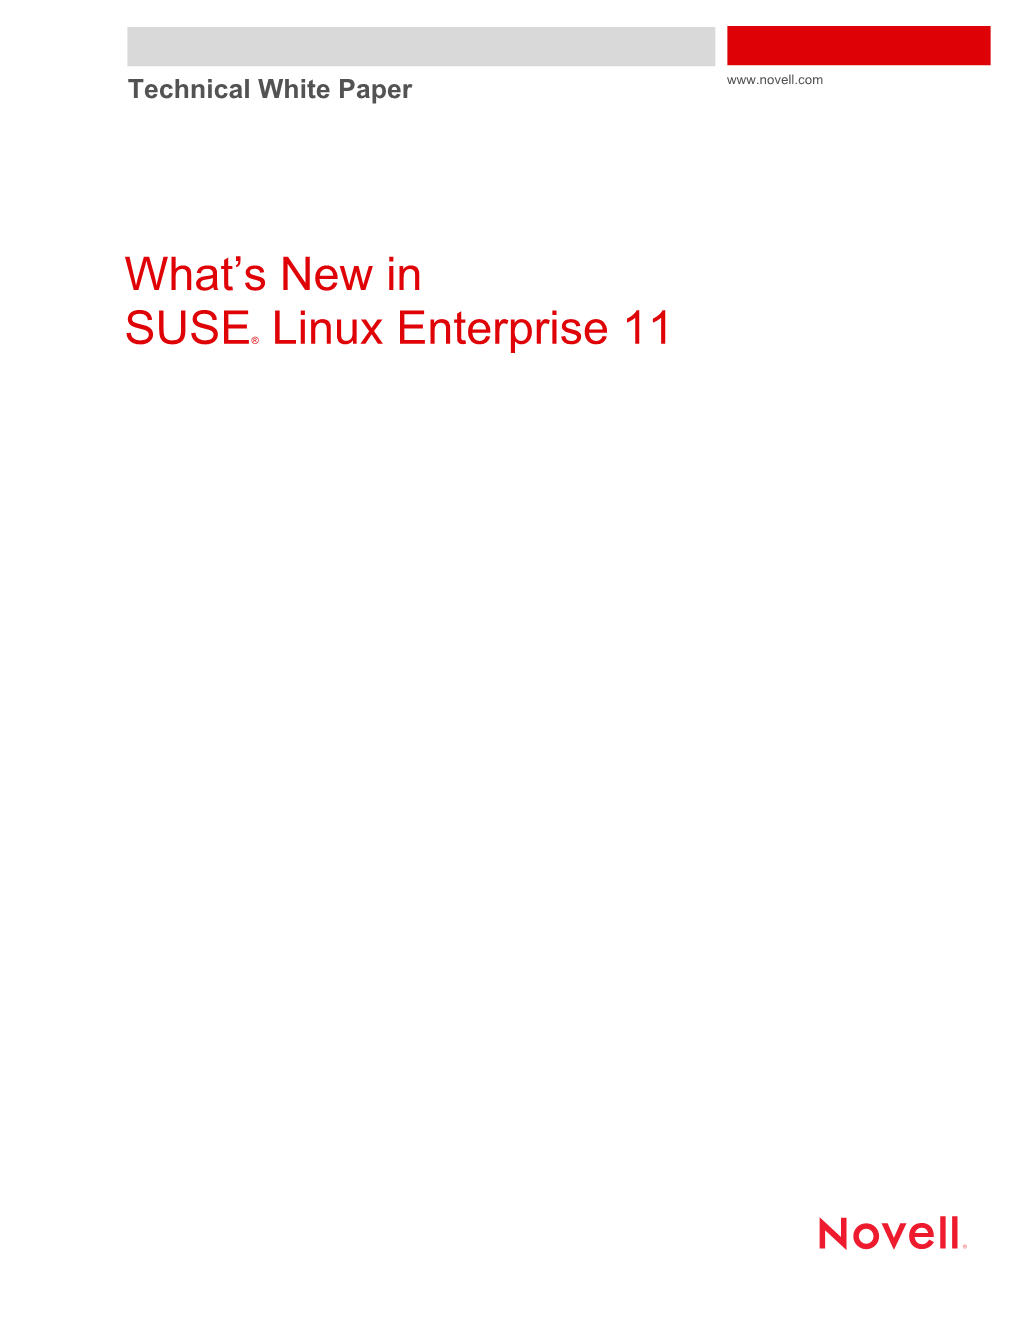 What's New in SUSE® Linux Enterprise 11